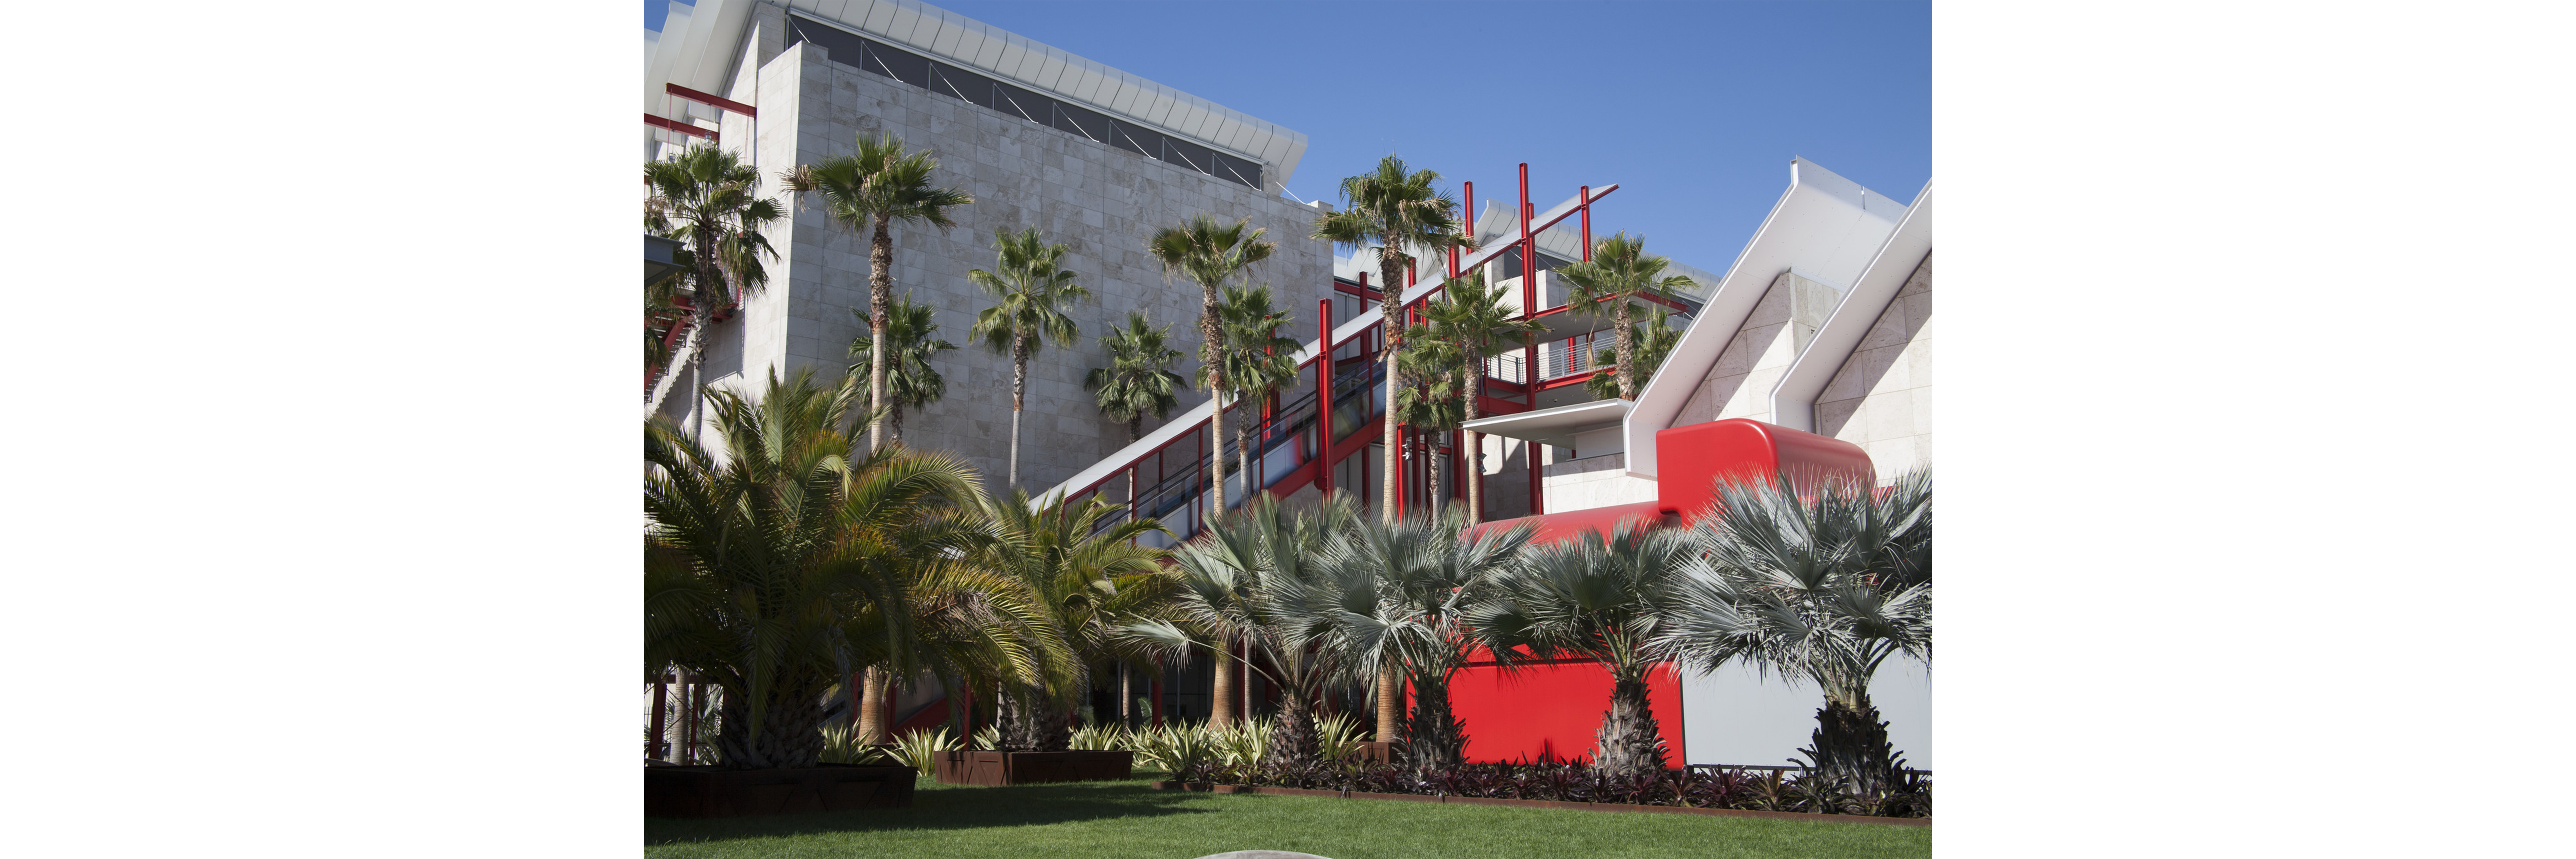 Exterior of BCAM (Broad Contemporary Art Museum) at the Los Angeles County Museum of Art, photo © Museum associates/ LACMA